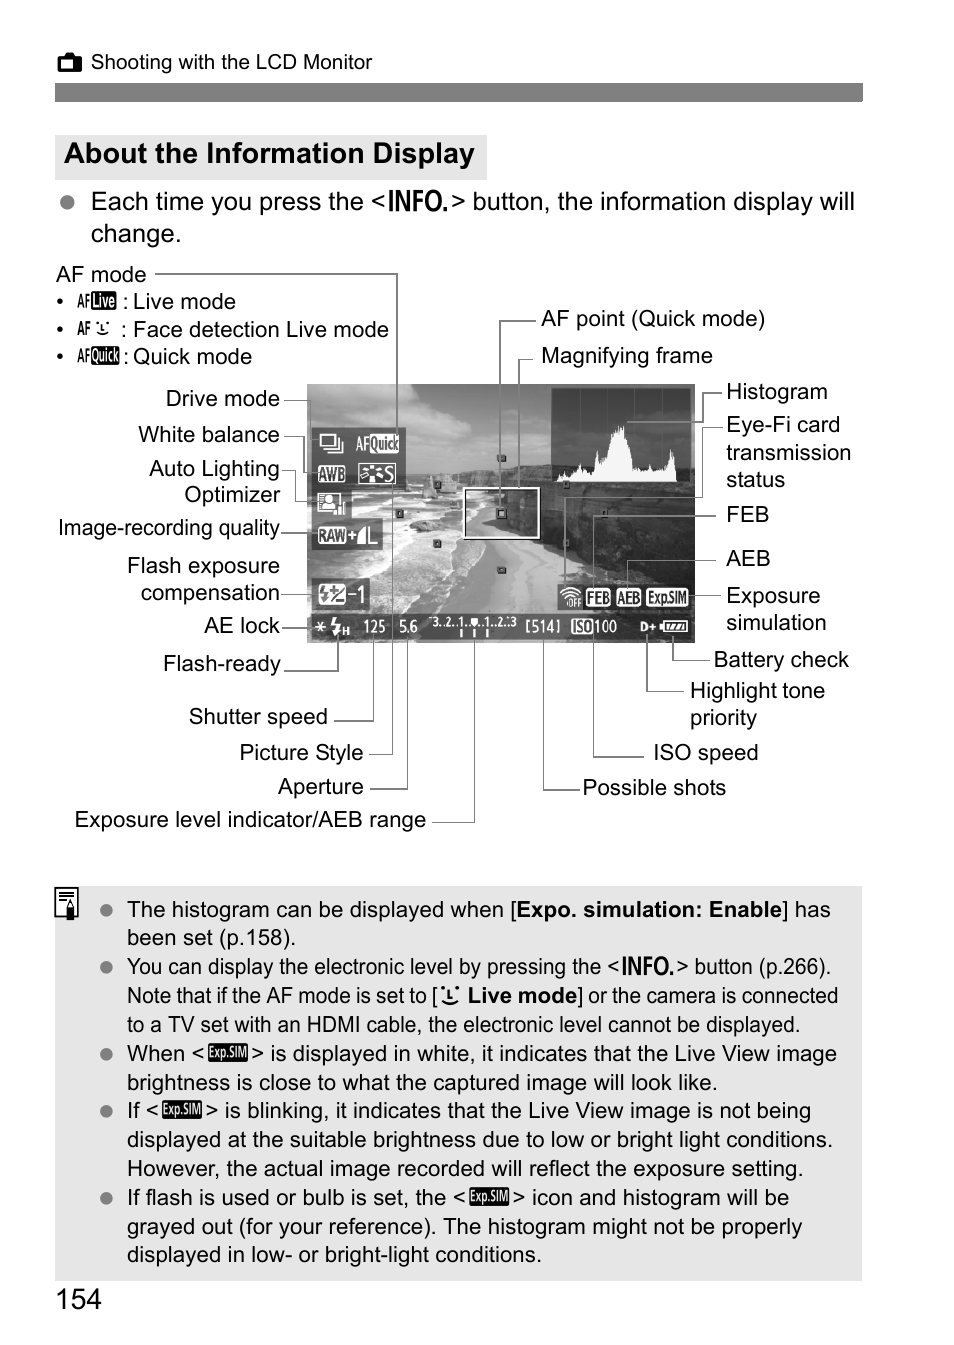 About the information display | Canon EOS 60D User Manual | Page 154 / 320